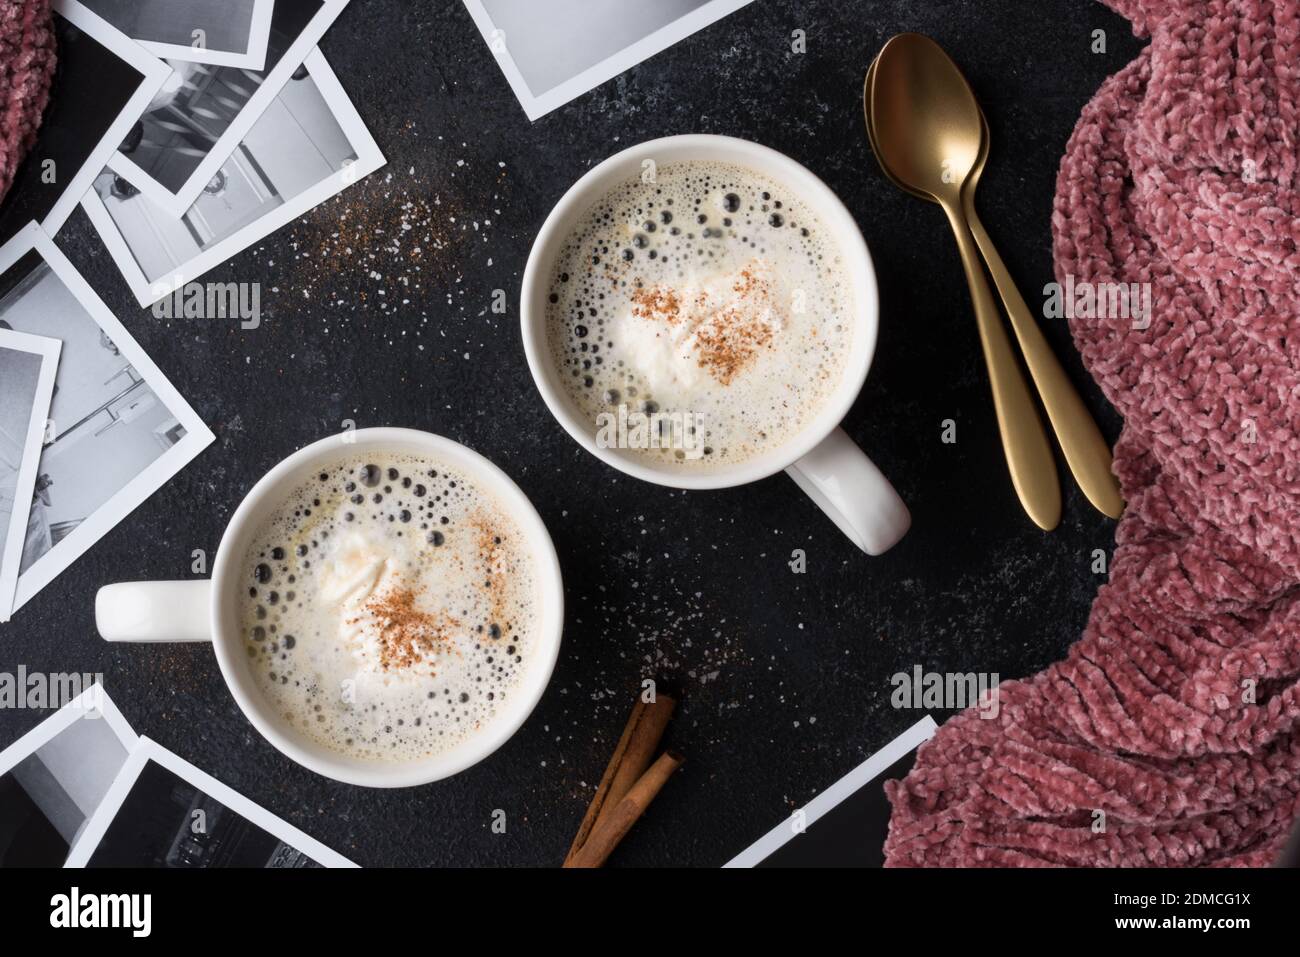 Directly Above Shot Of Coffee In Cups By Photographs On Table Stock Photo